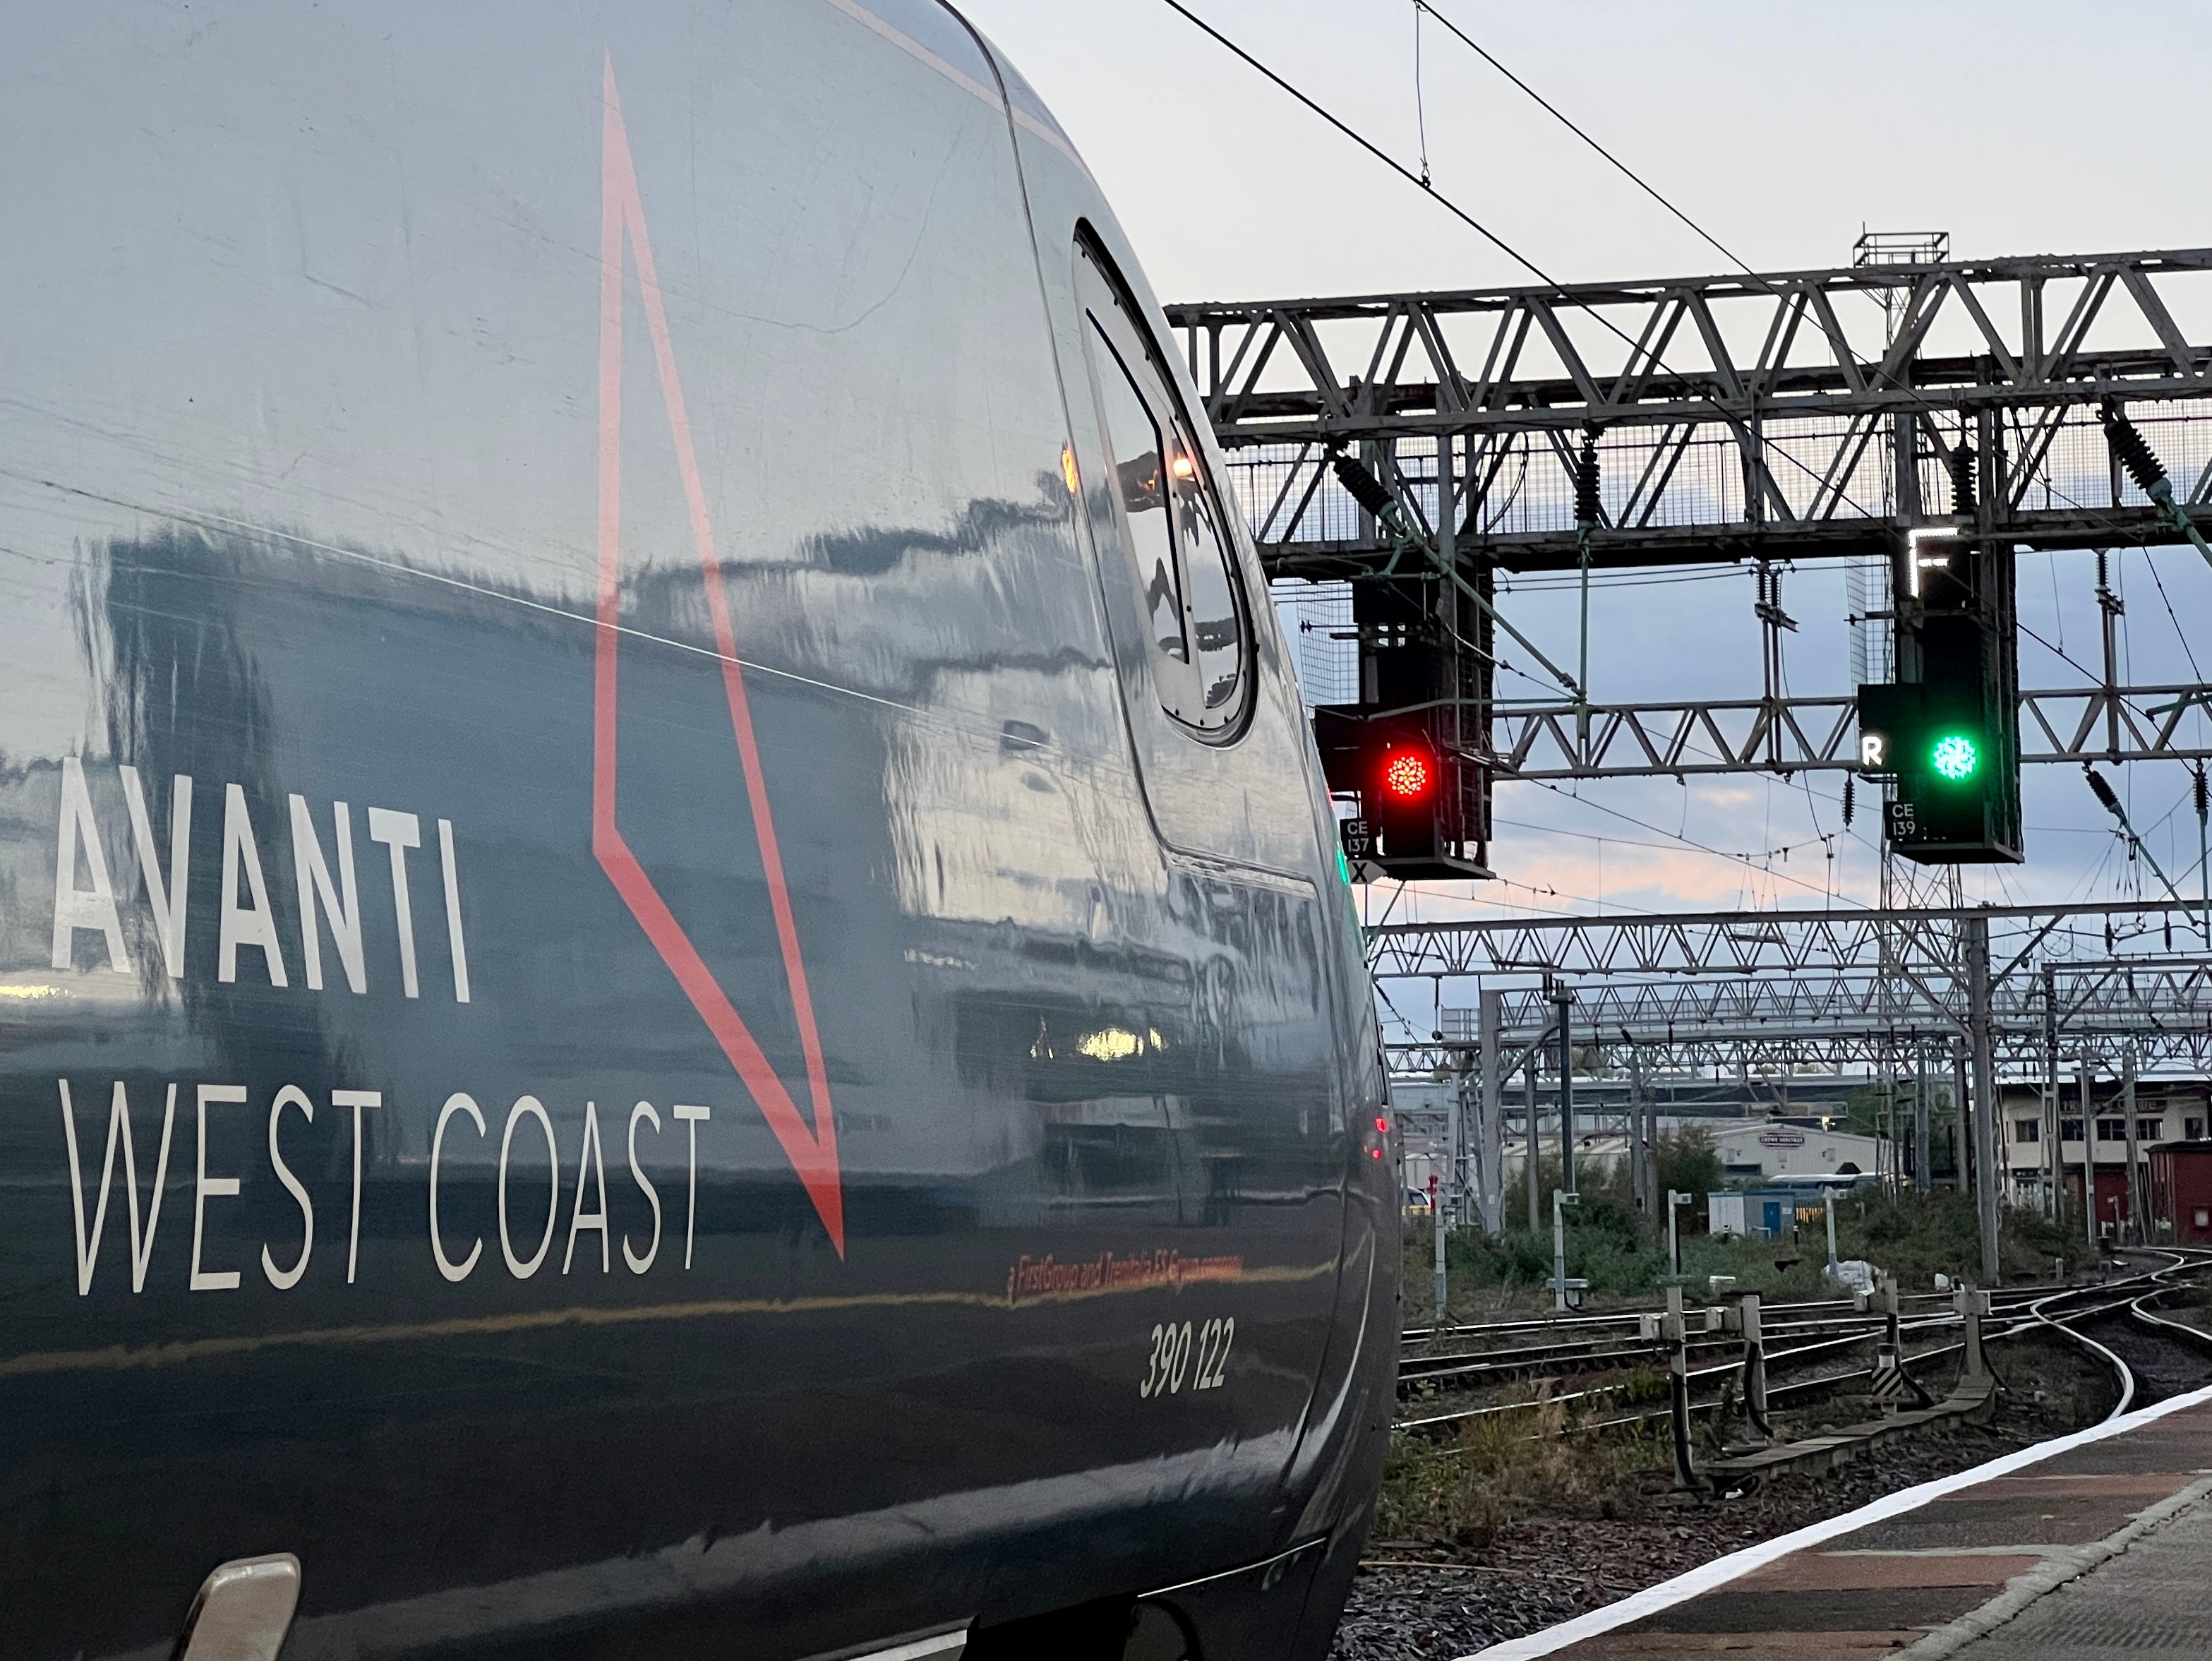 Stop or go? Avanti West Coast train at Crewe station in Cheshire